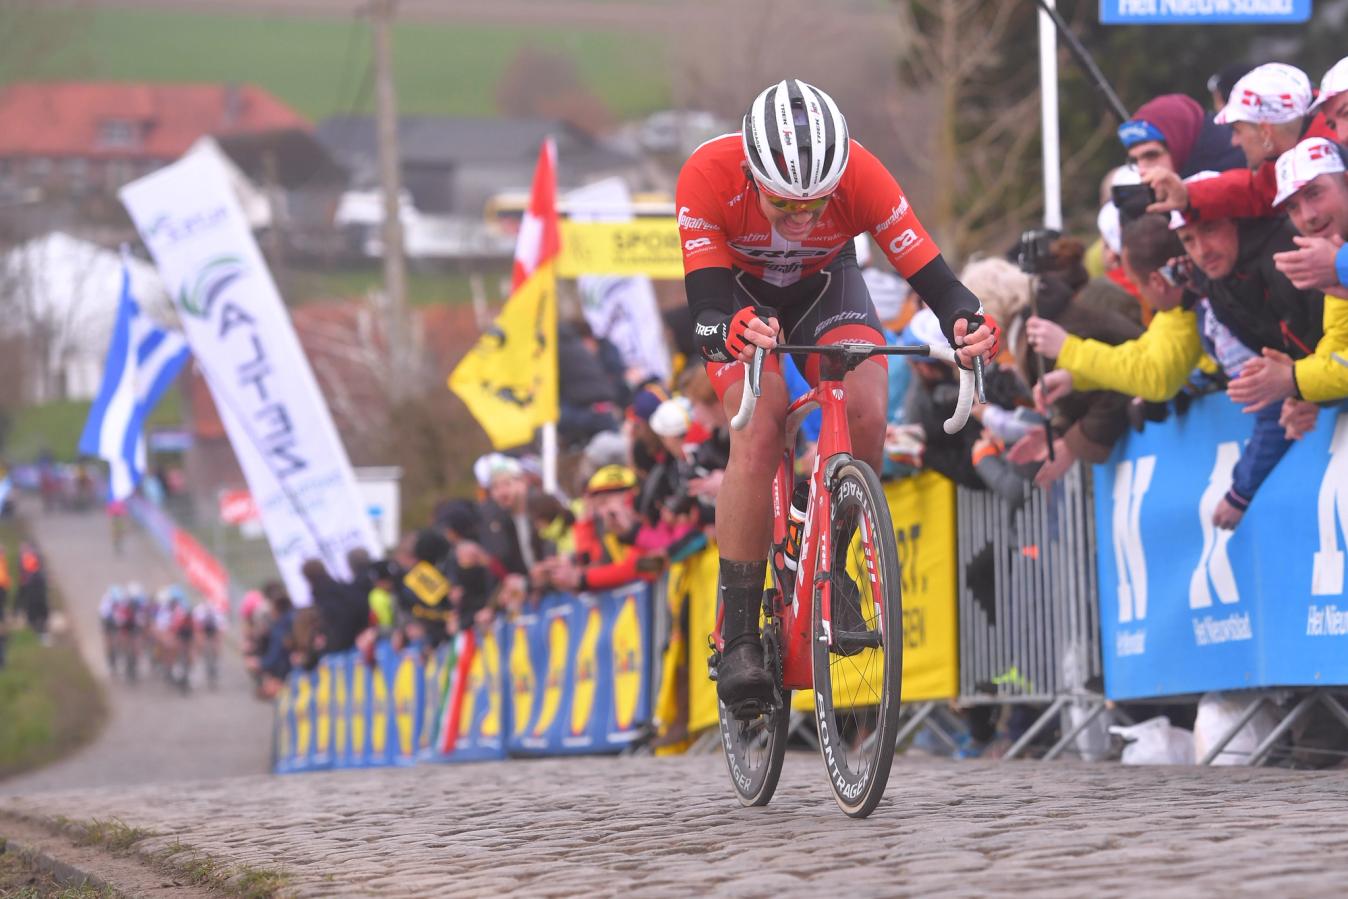 Pedersen finished in second place as the underdog in 2018. He knows that anything is possible in the Tour of Flanders